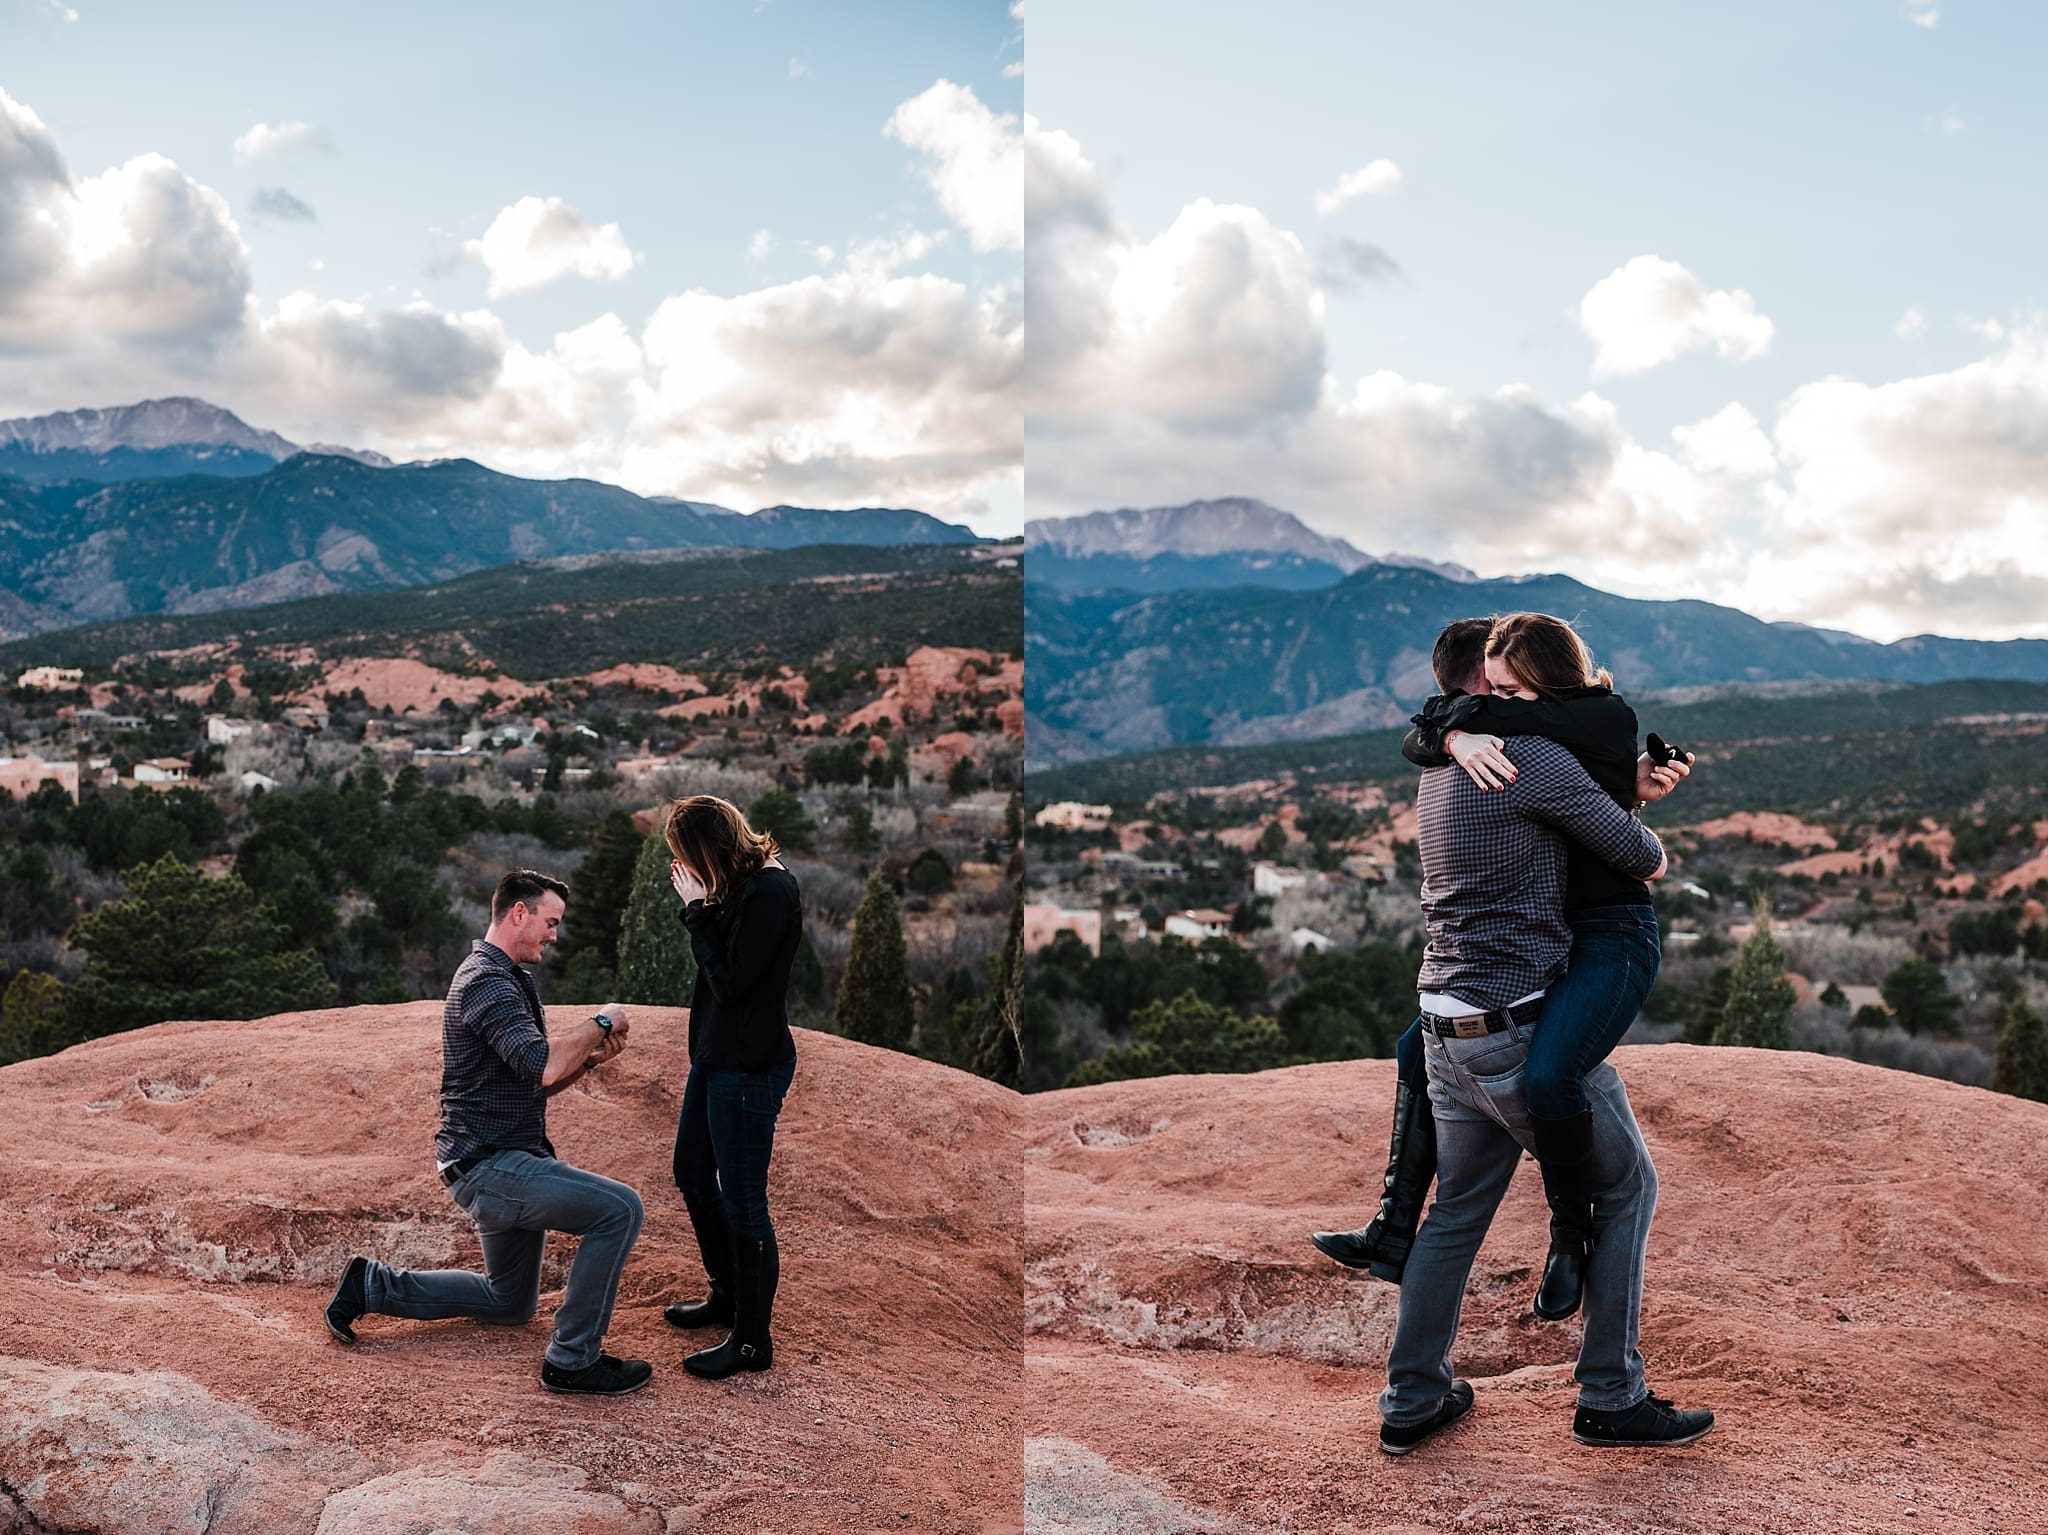 surprise proposal at garden of the gods in colorado springs